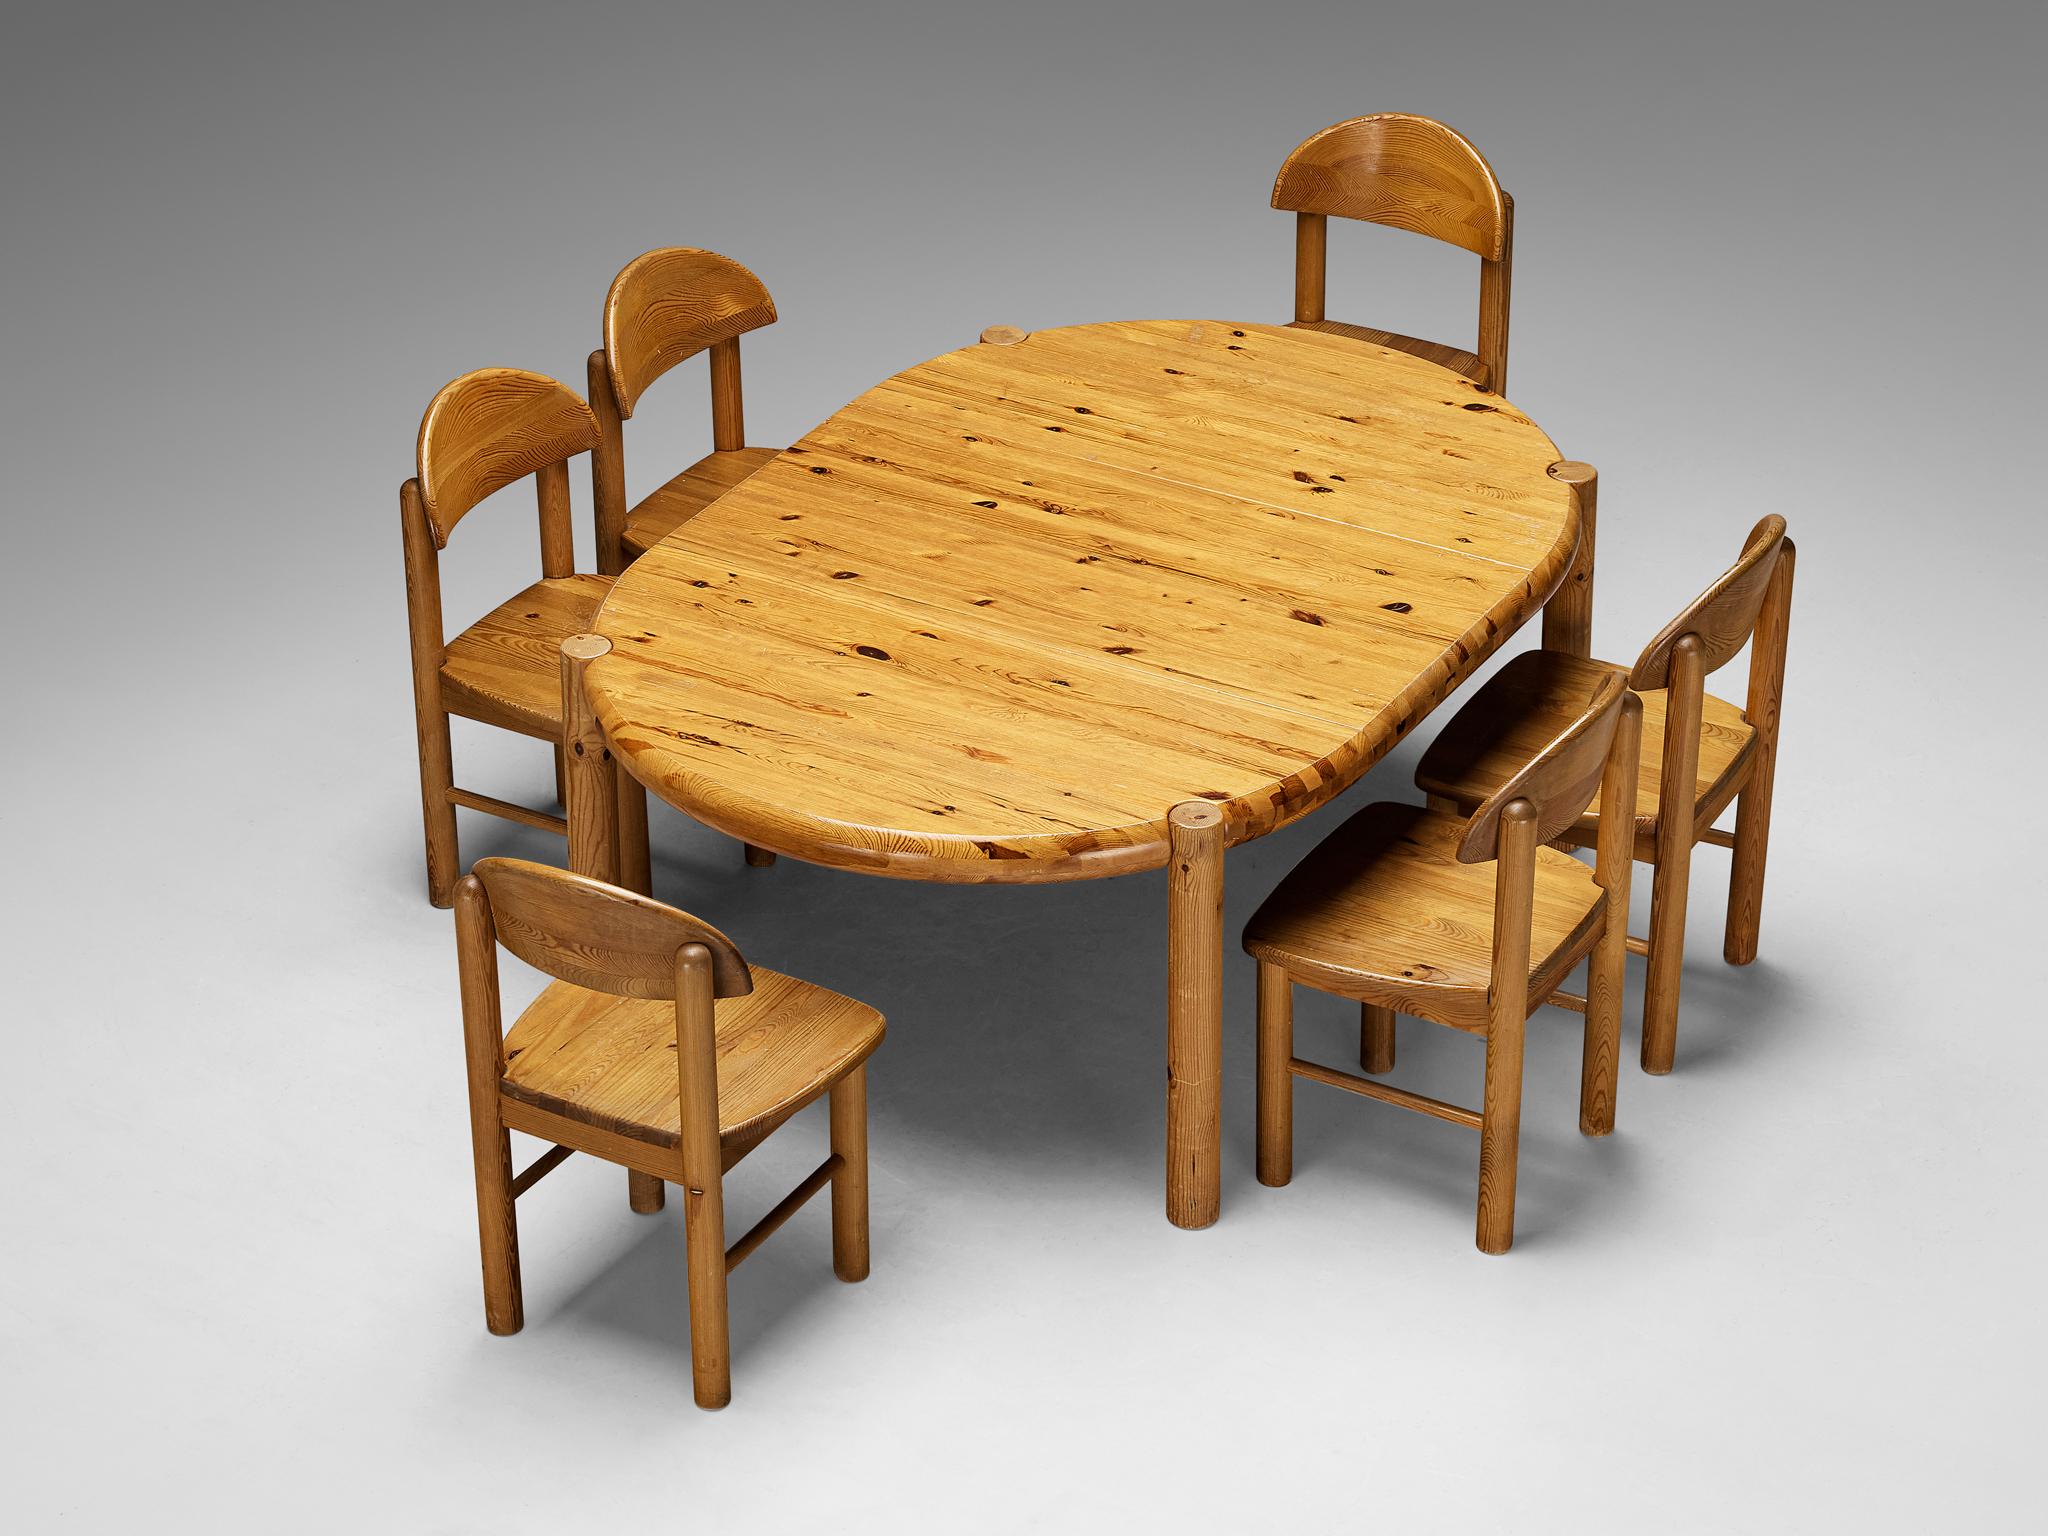 Rainer Daumiller, set of dining table with six chairs, pine, Denmark, 1970s.

This dining room set contains an extendable dining table and six dining chairs, designed by Rainer Daumiller. The table can be configured into two versions by means of the